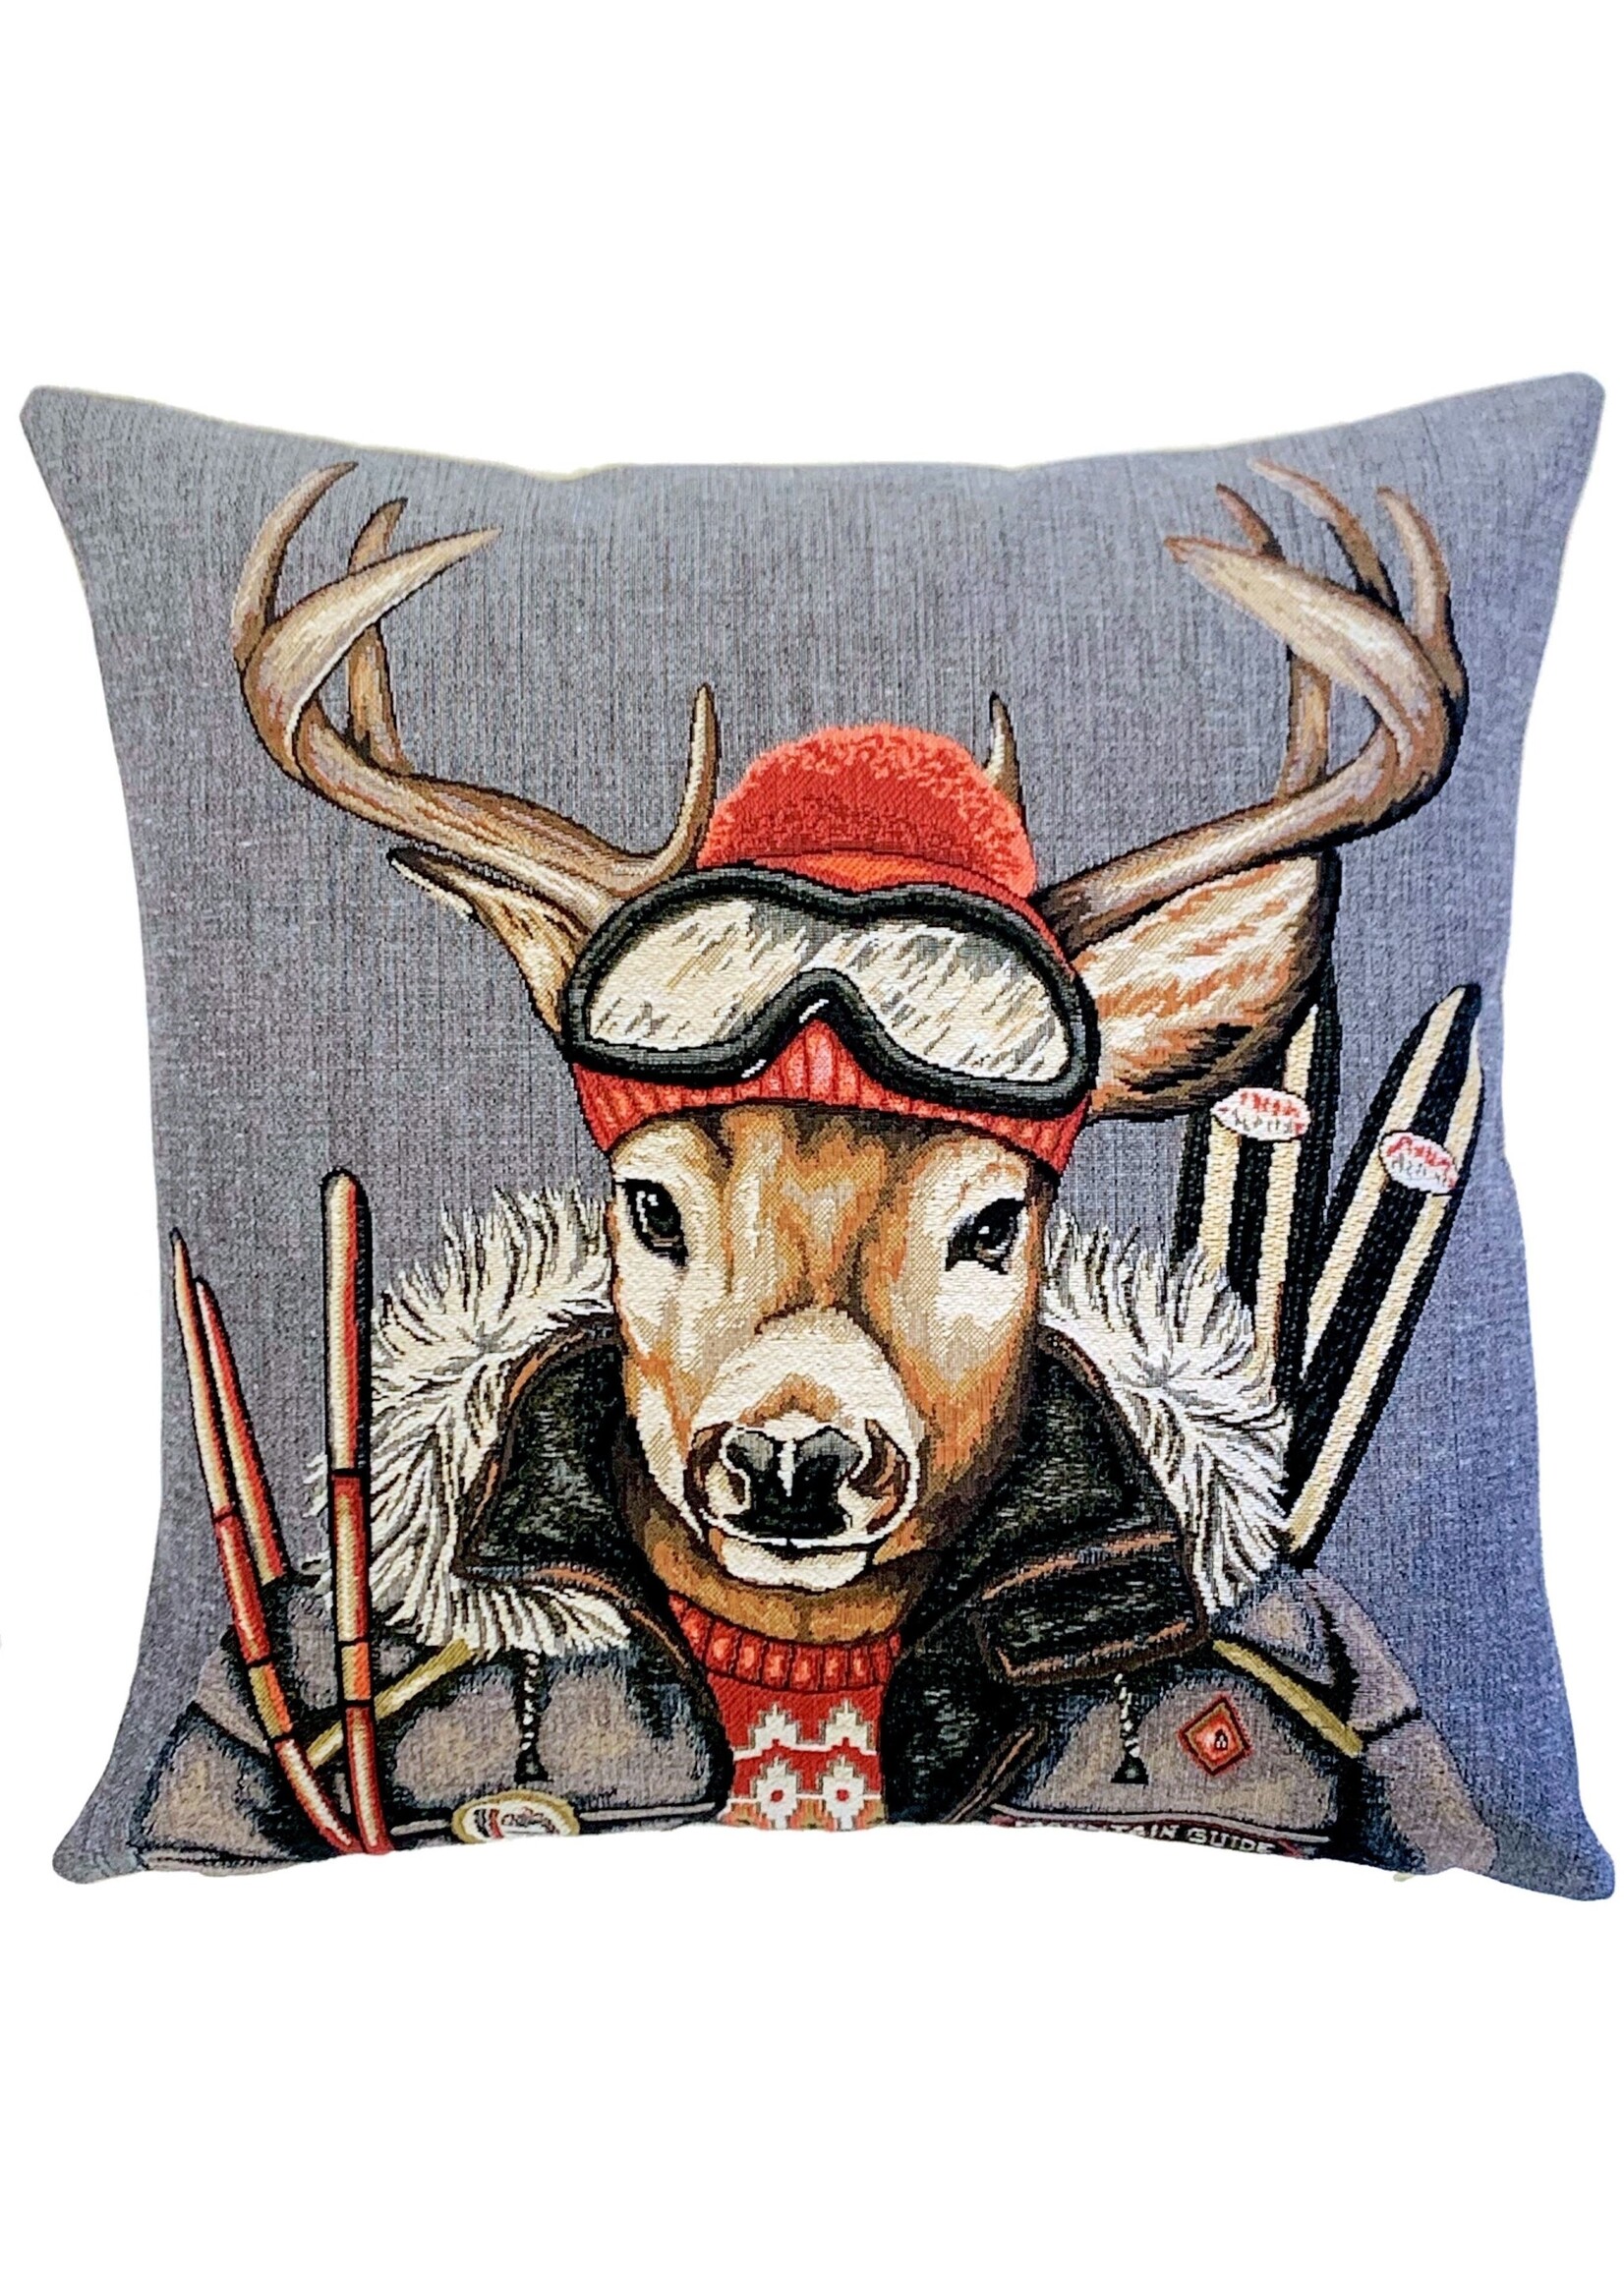 Pillow with Insert - Skiing Stag